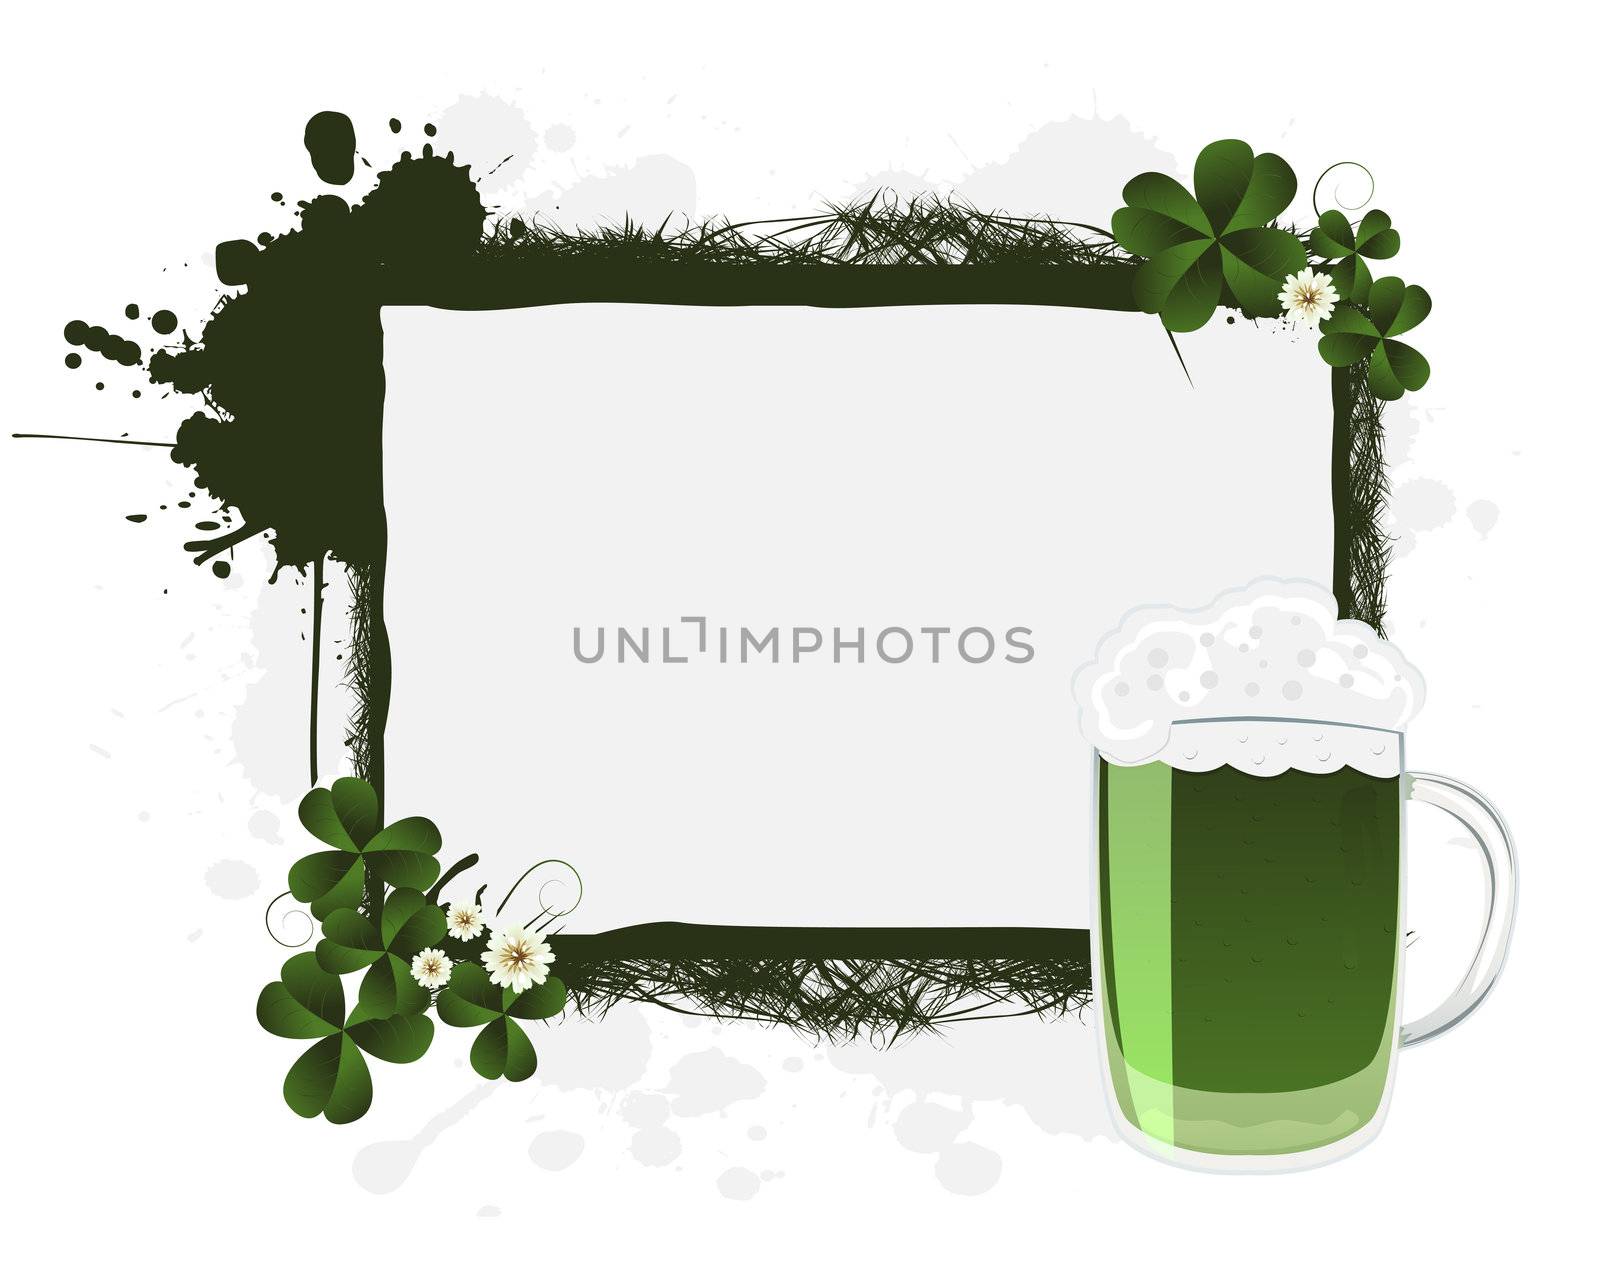 St. Patrick's banner by Lirch